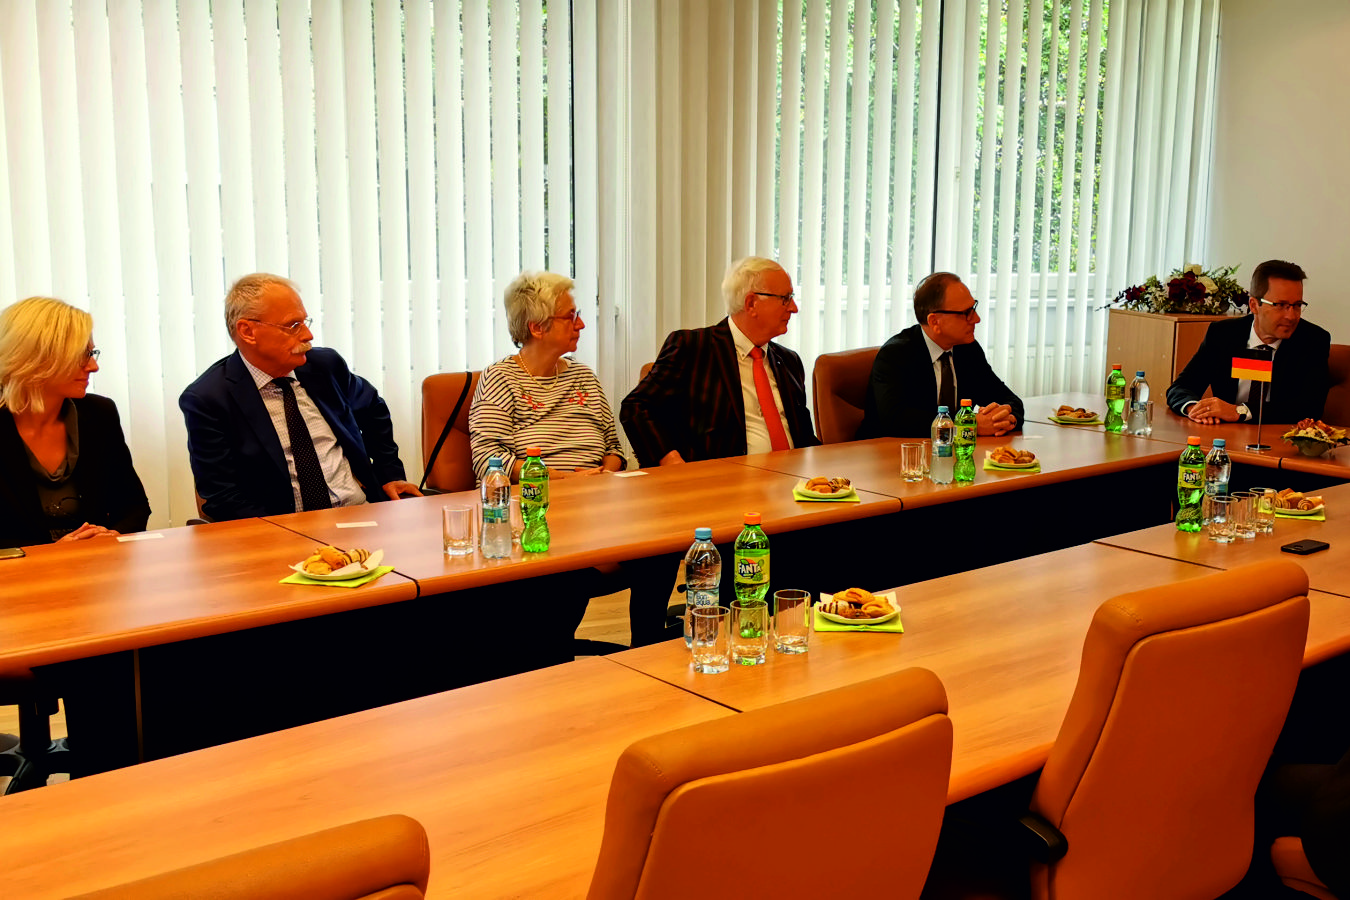 Friendly meeting with representatives of the city of Wuppertal